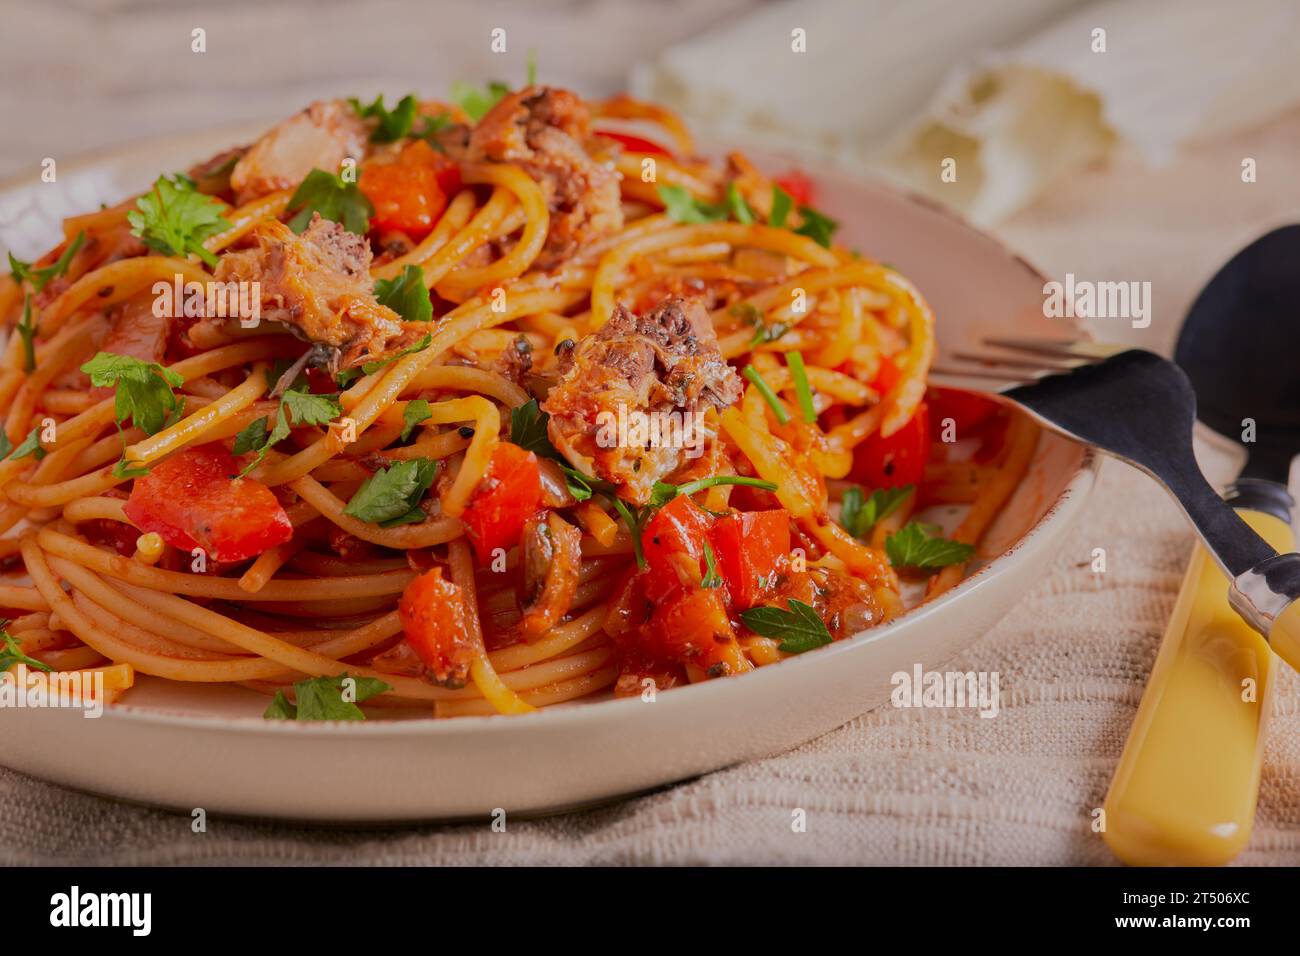 Sardines and pasta dish with vegetables and herbs. Stock Photo